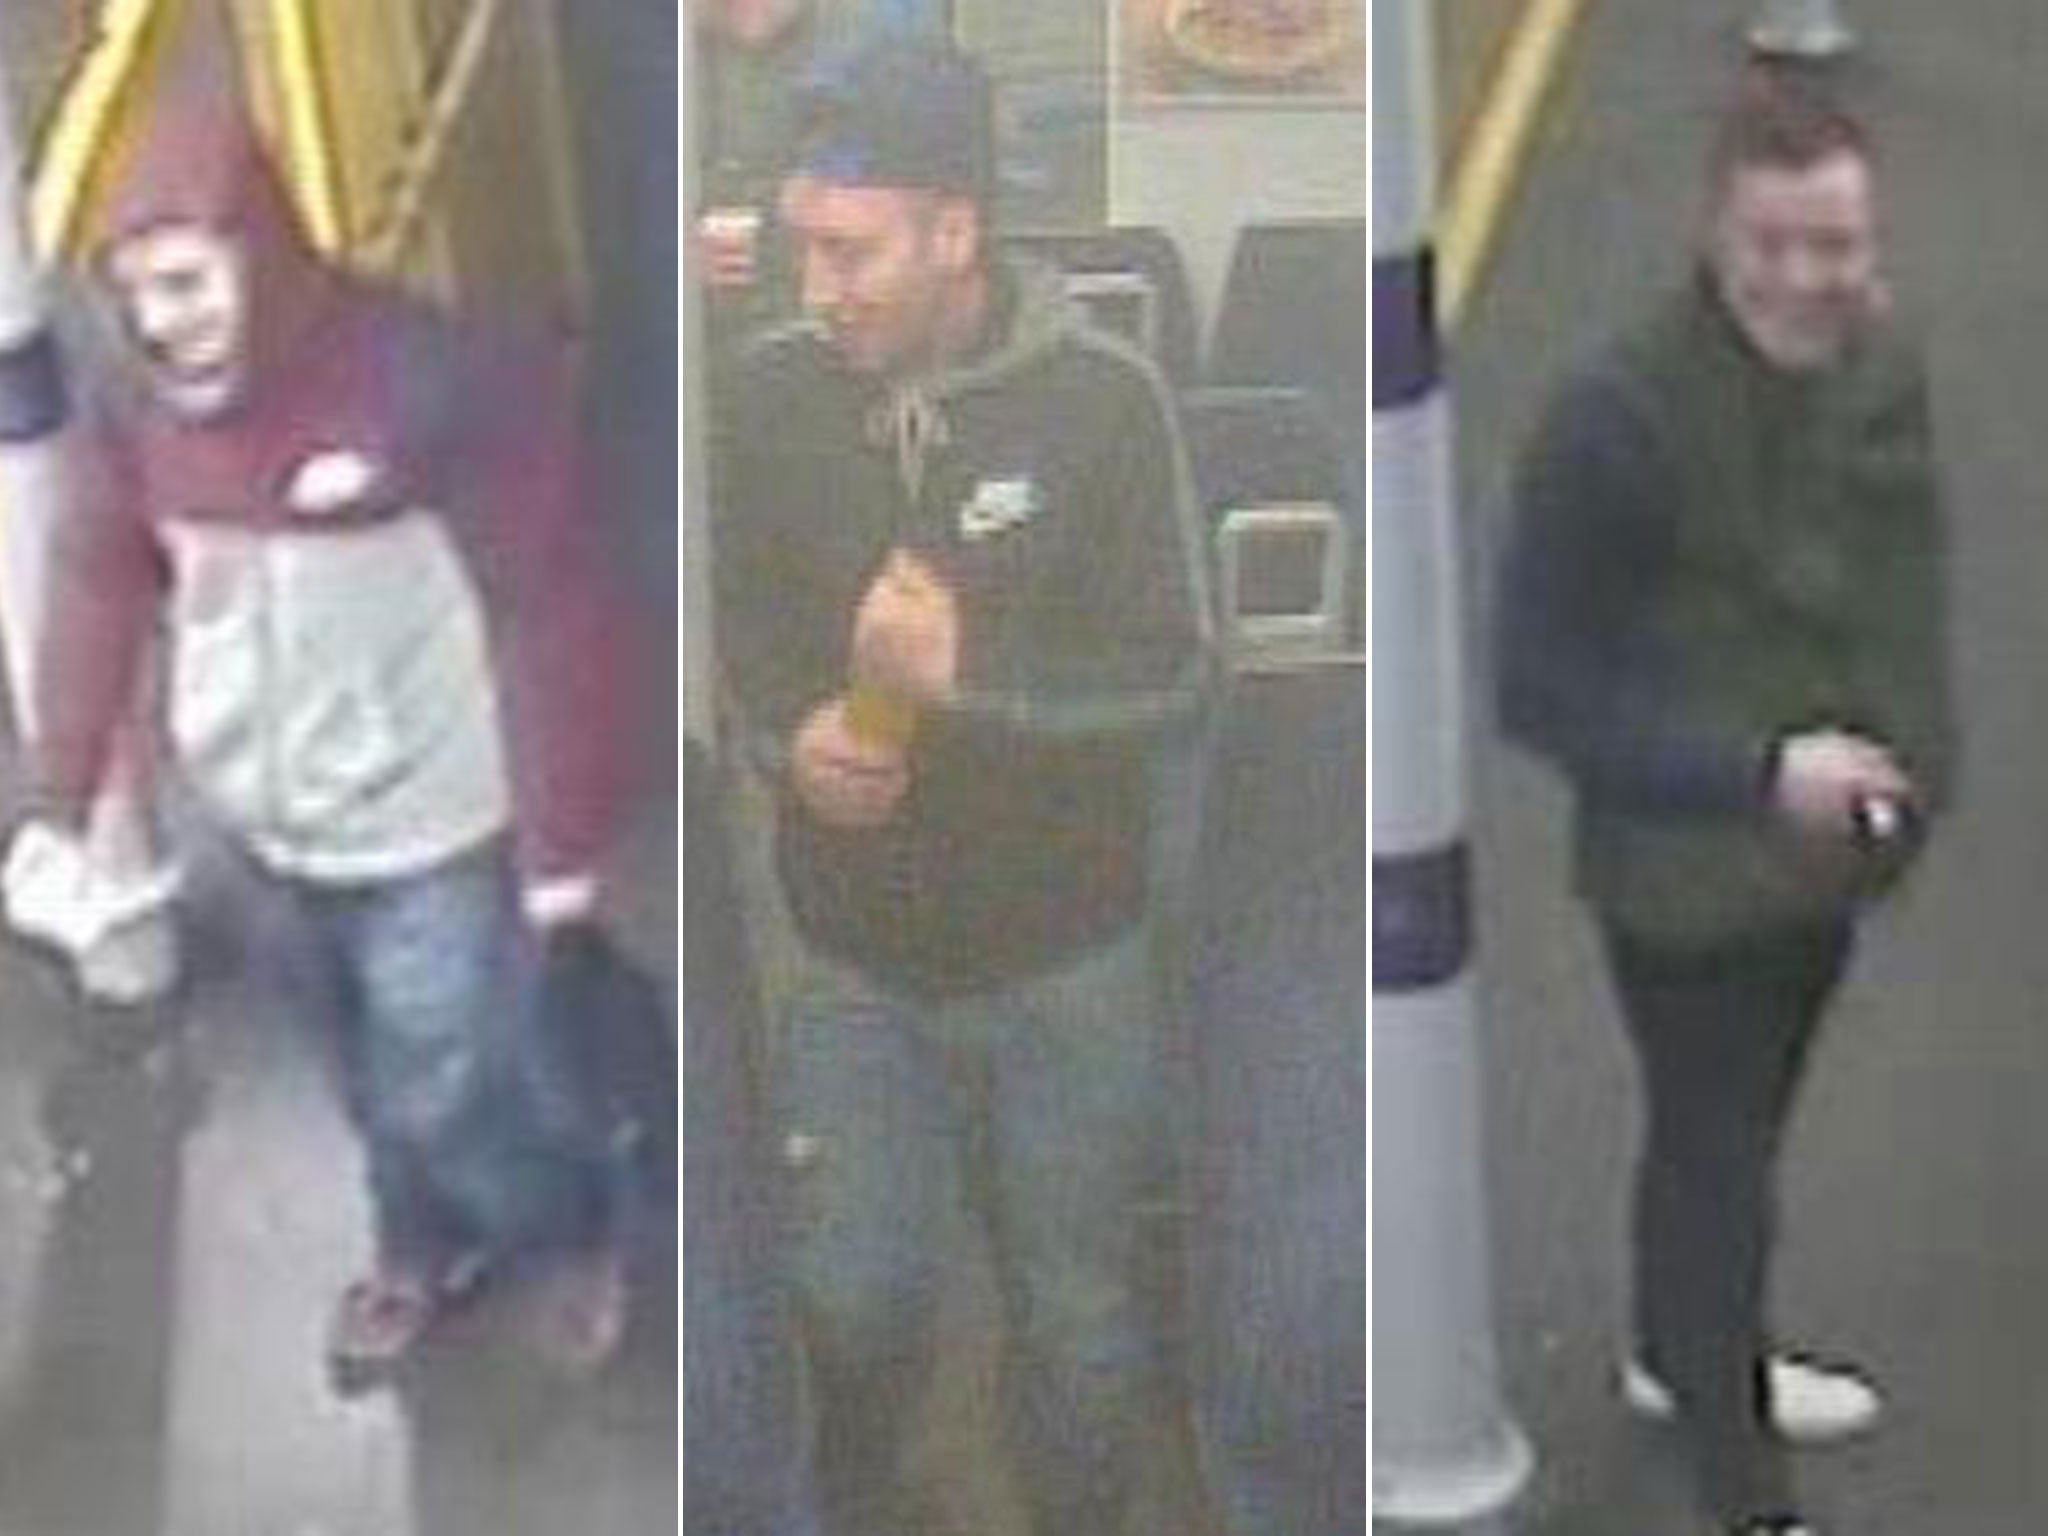 British Transport Police have released these CCTV images of the men they wish to speak to in connection with the assault